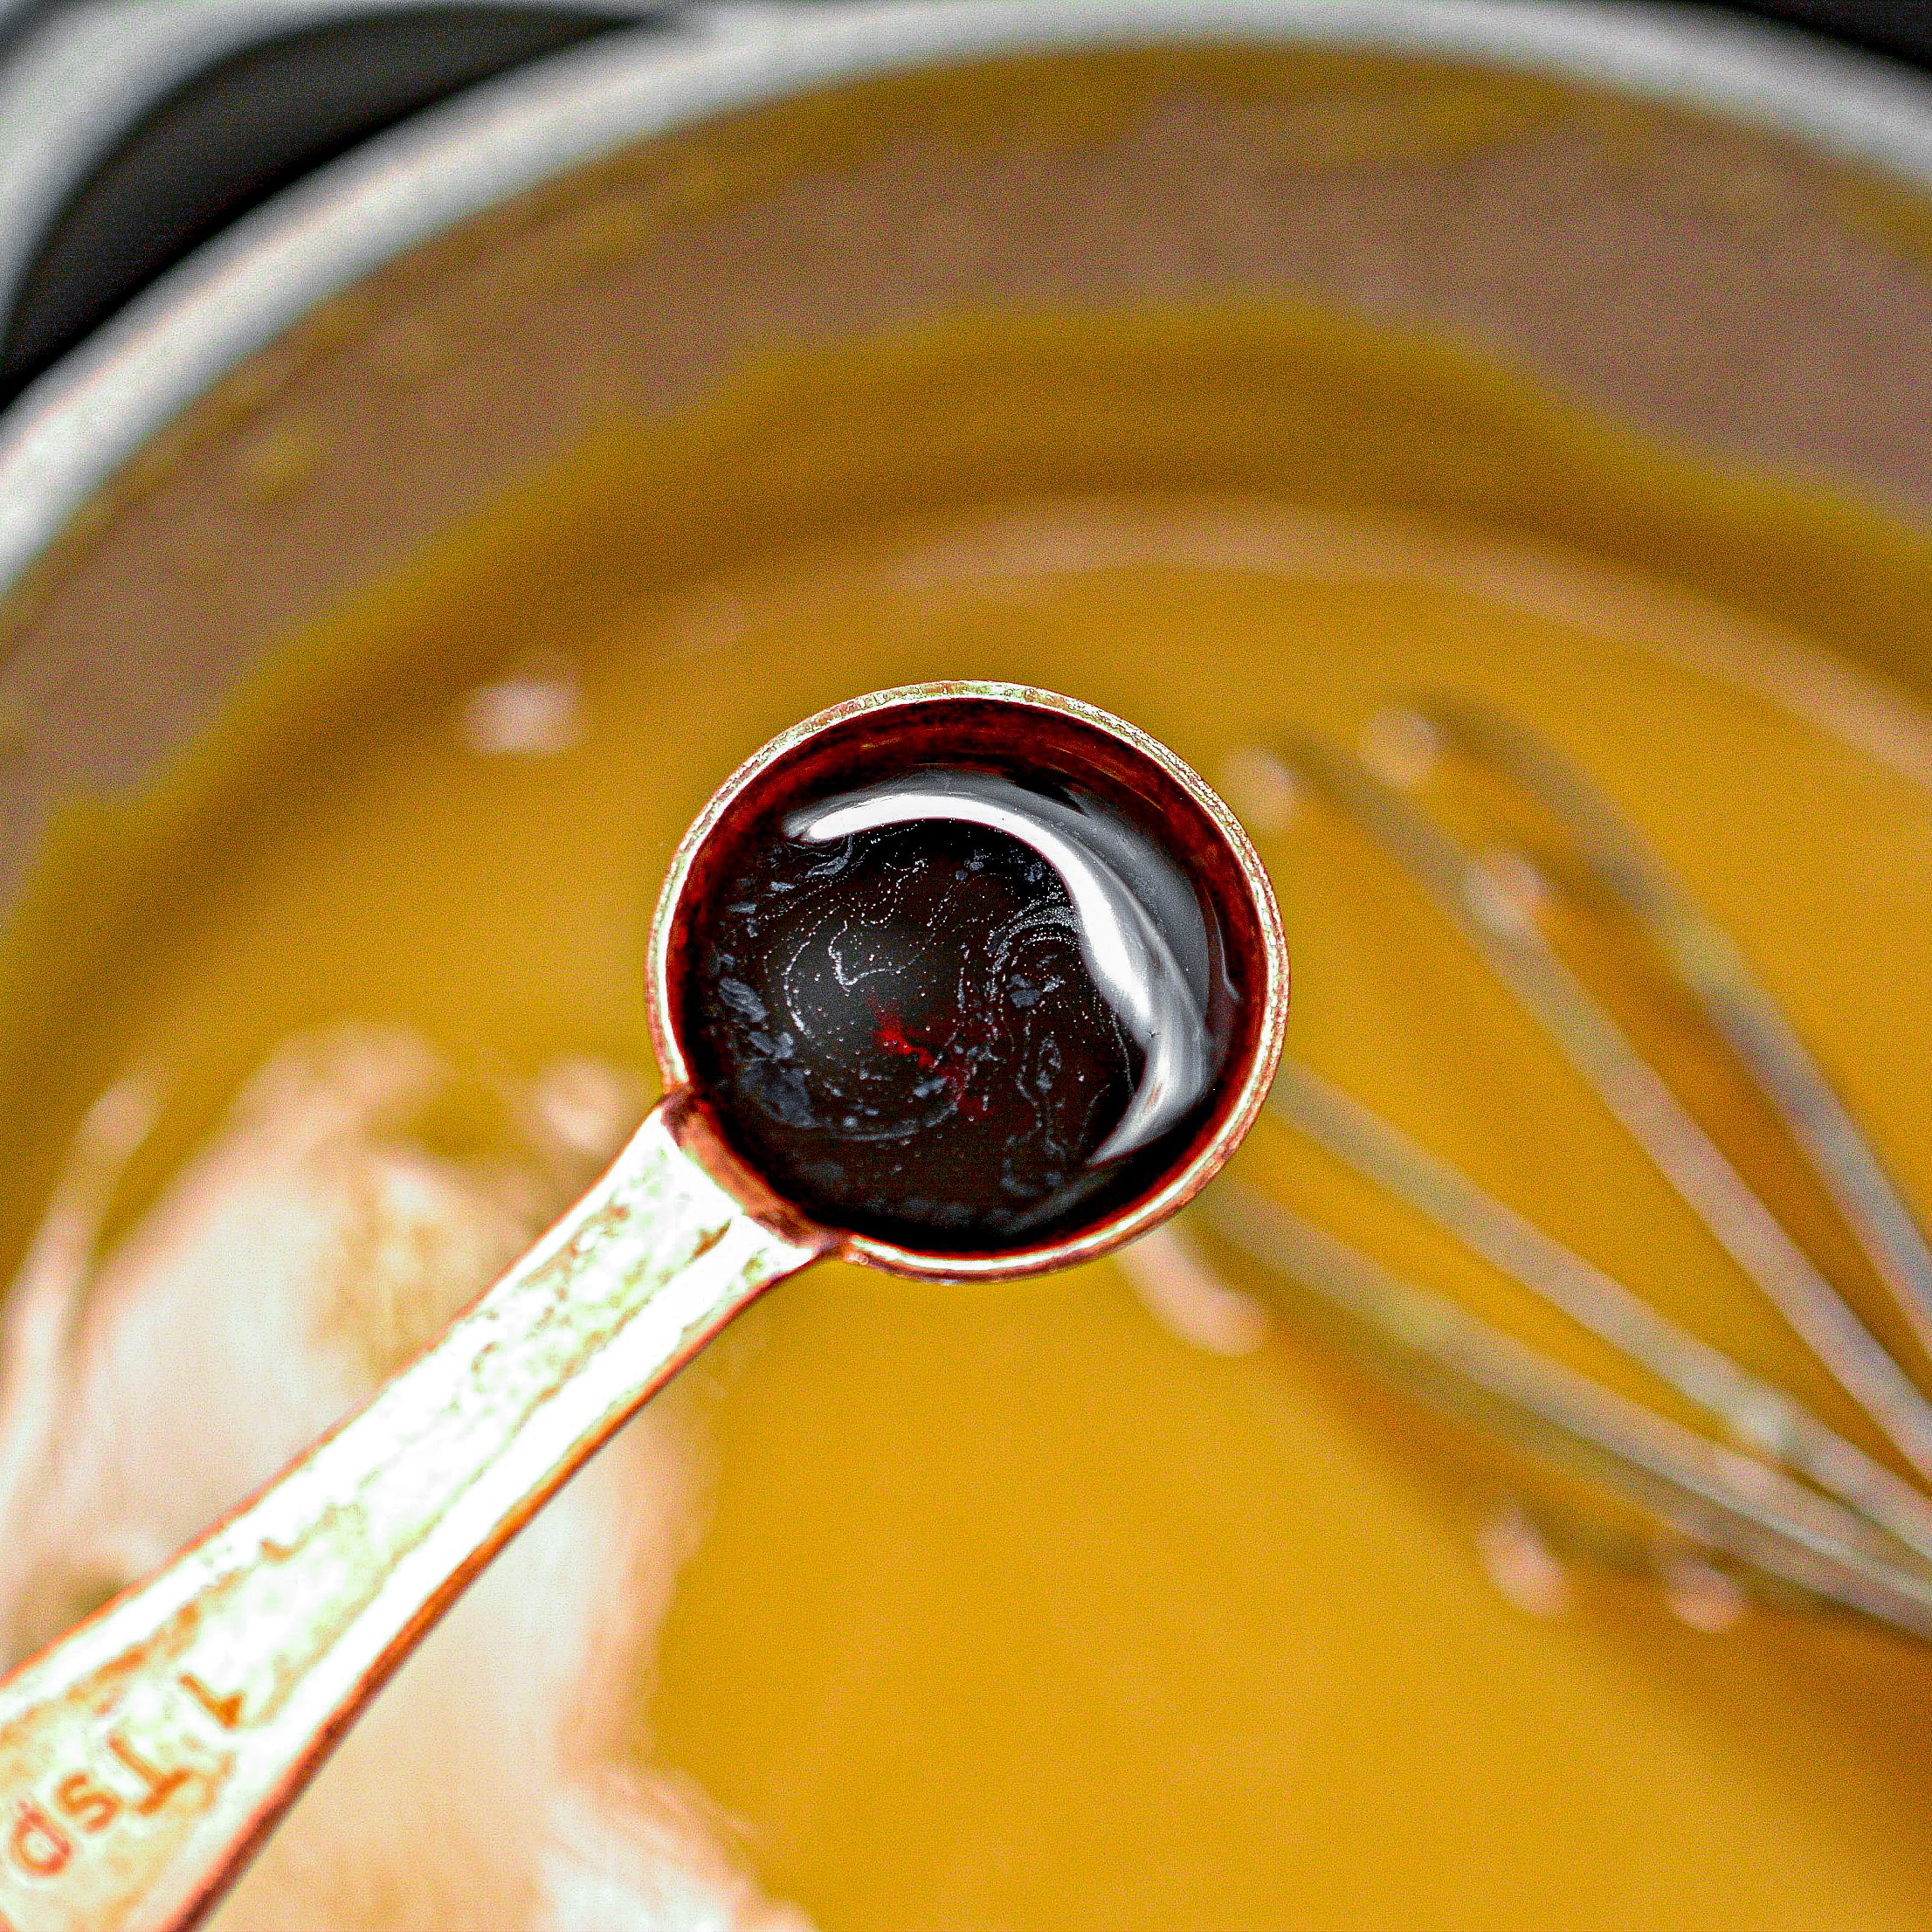 Stir in the vanilla and mix to combine.